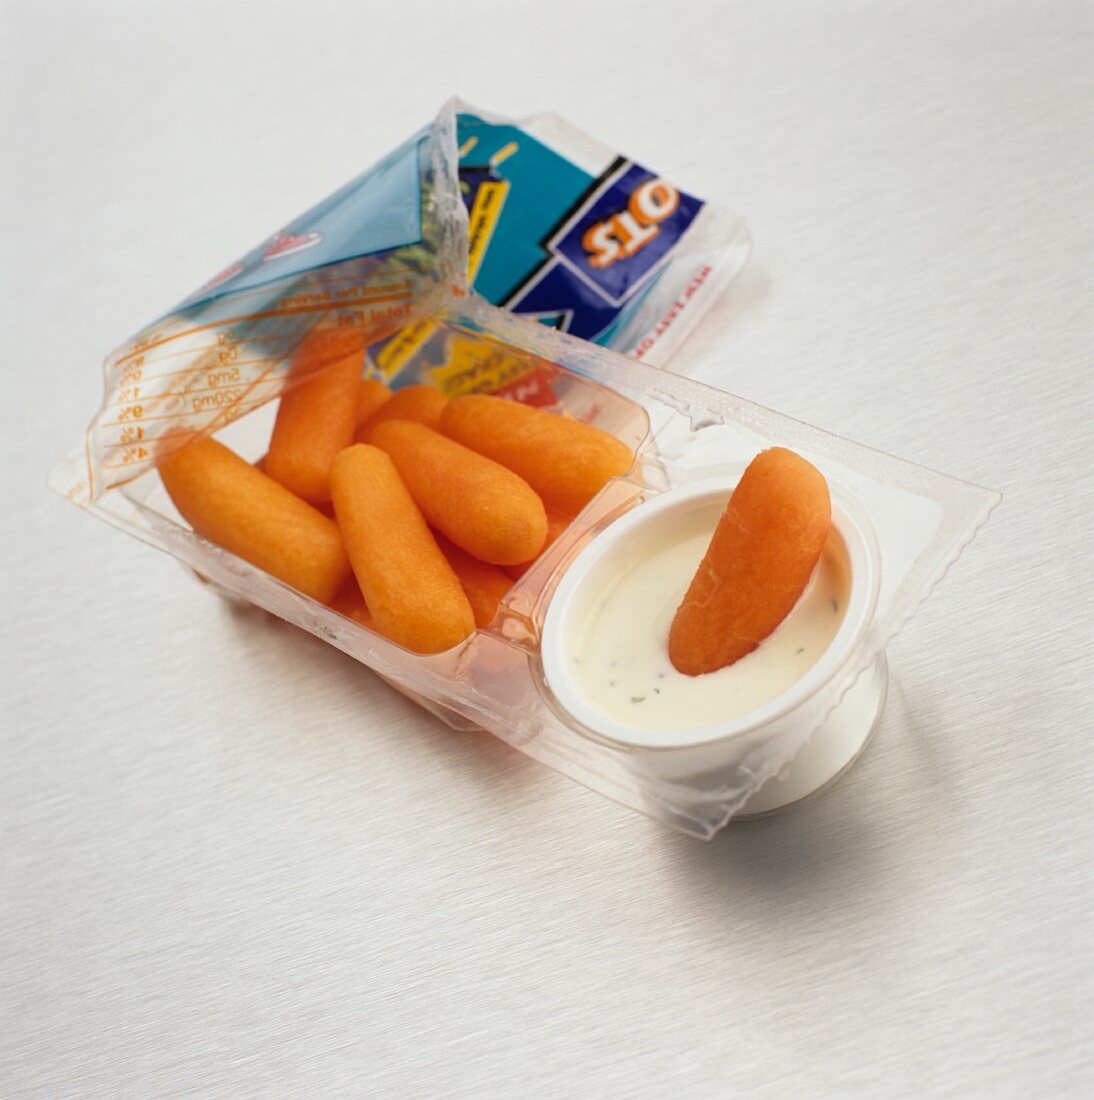 Baby Carrots and Dip Snack Pack; Opened with Carrot Dipped into Dip